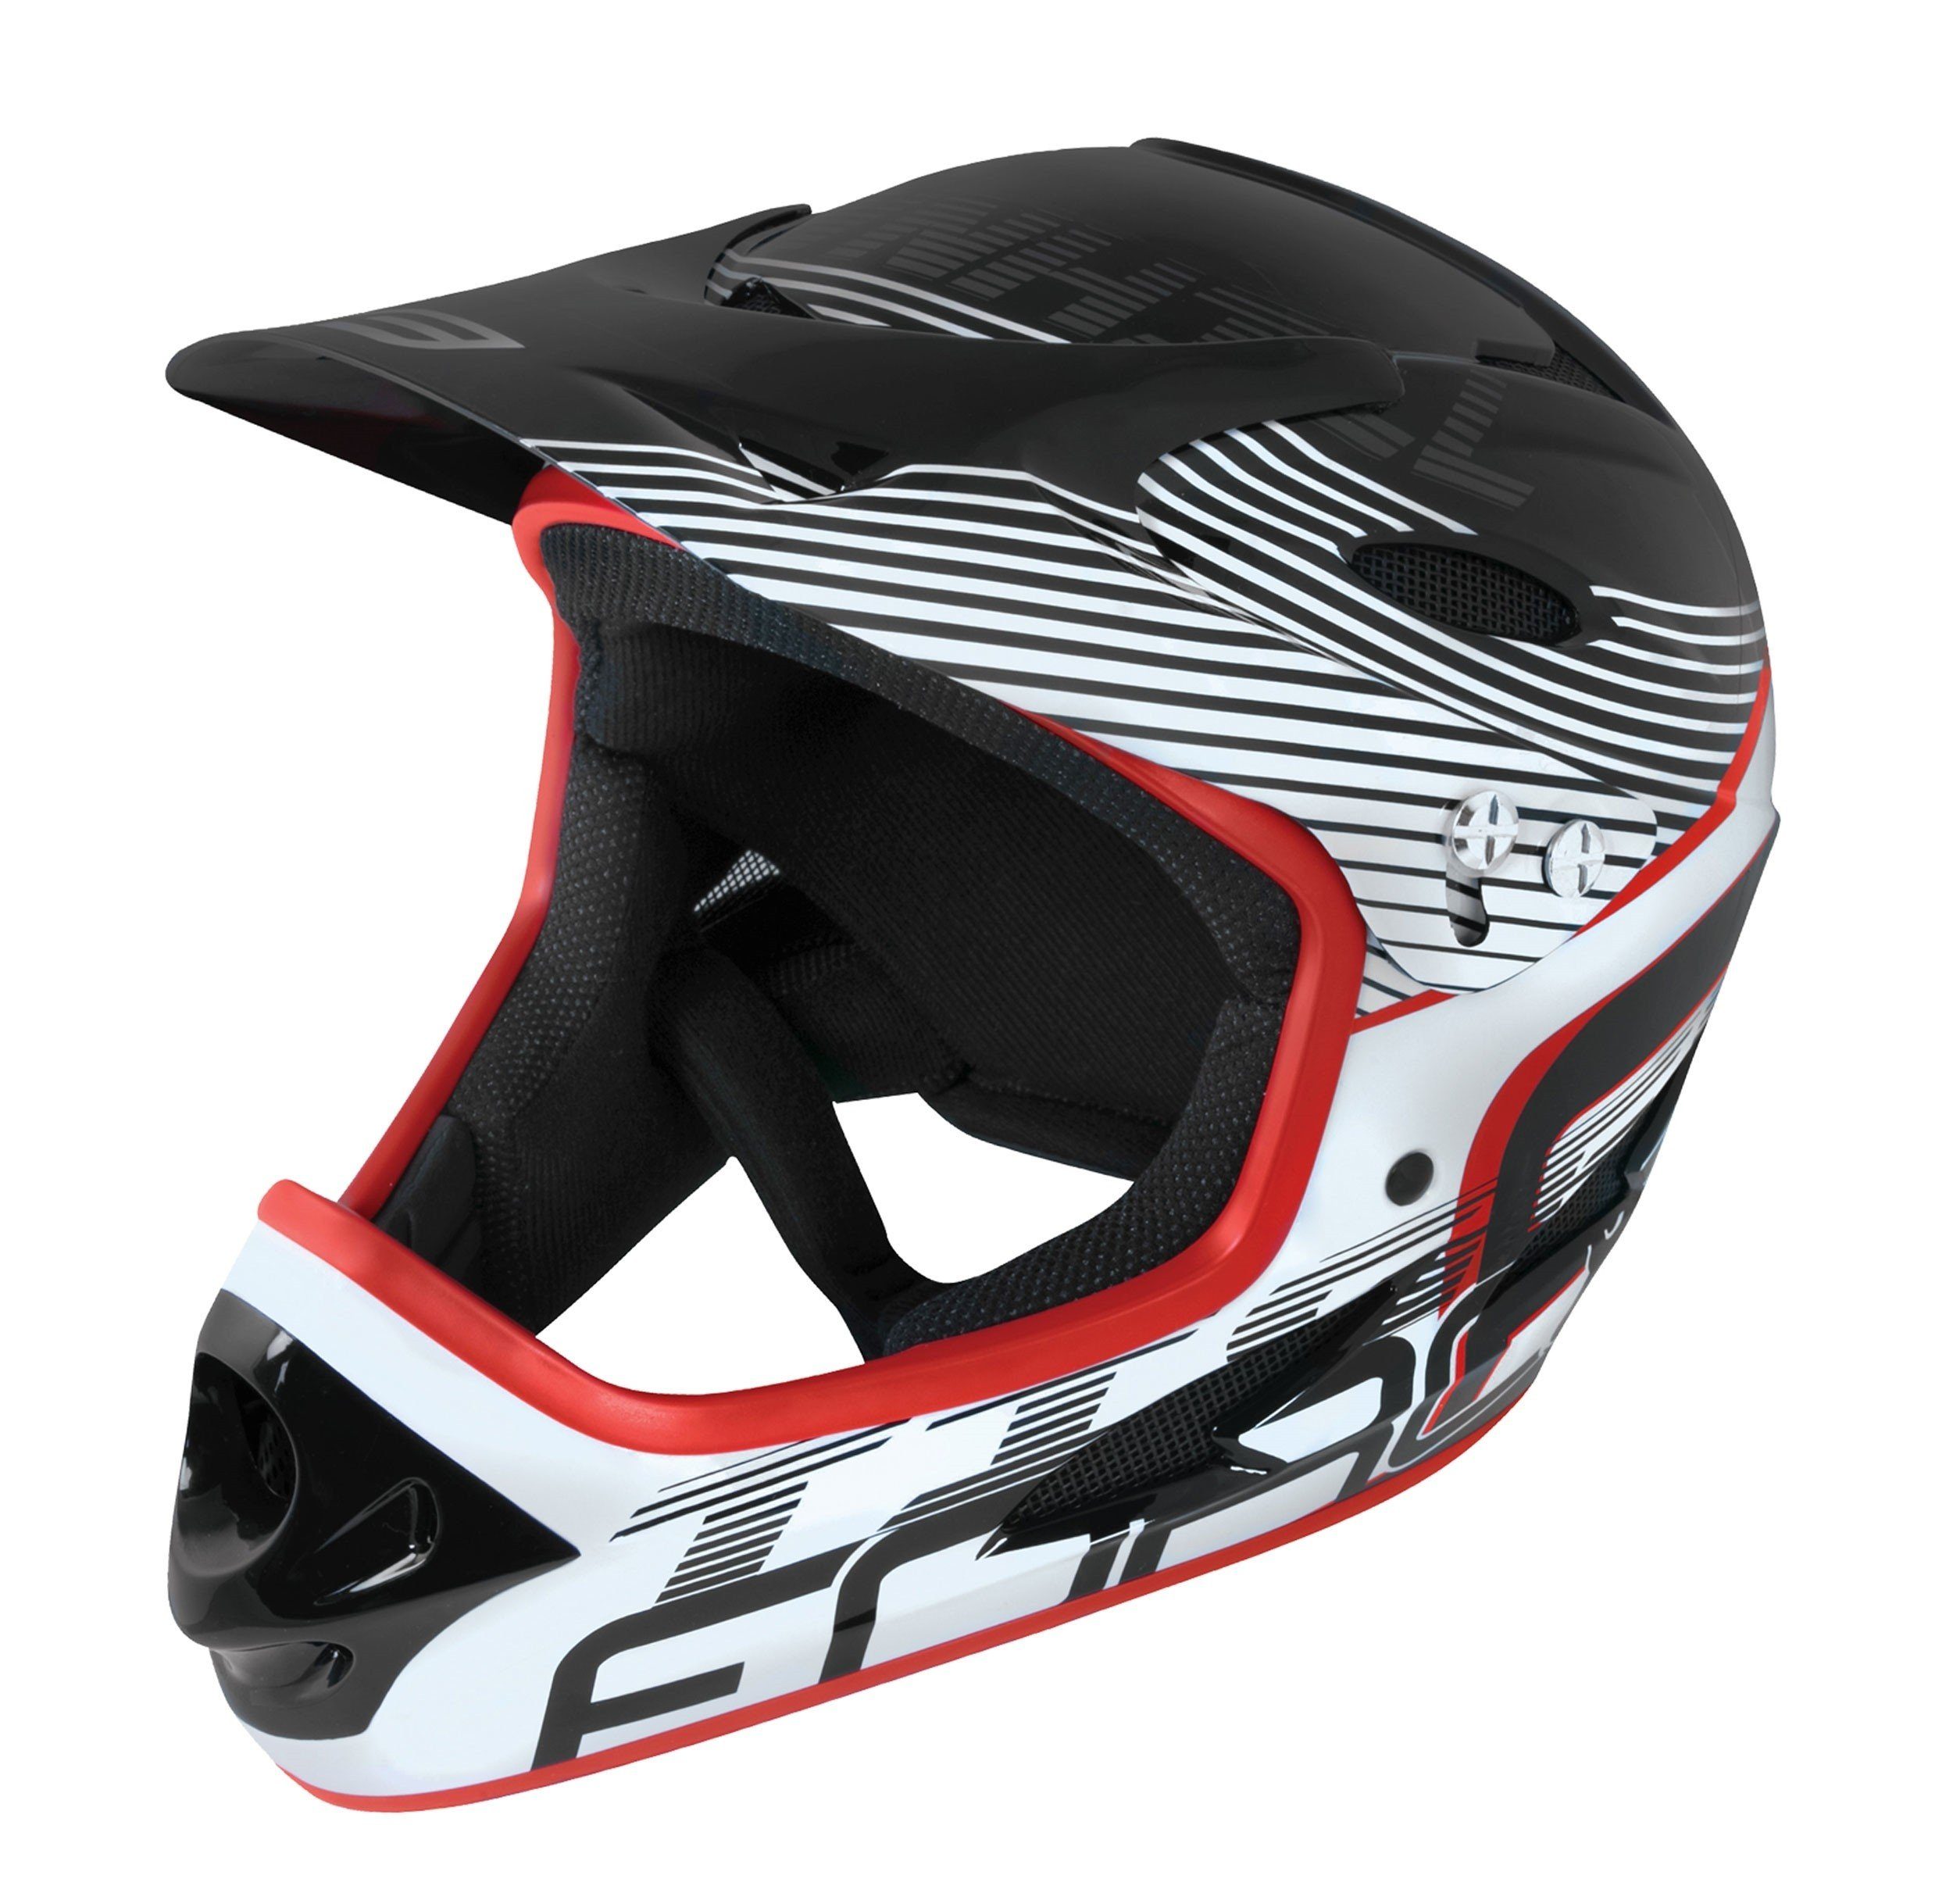 FORCE Fahrradhelm Downhill Helm FORCE TIGER black-red-white S-M